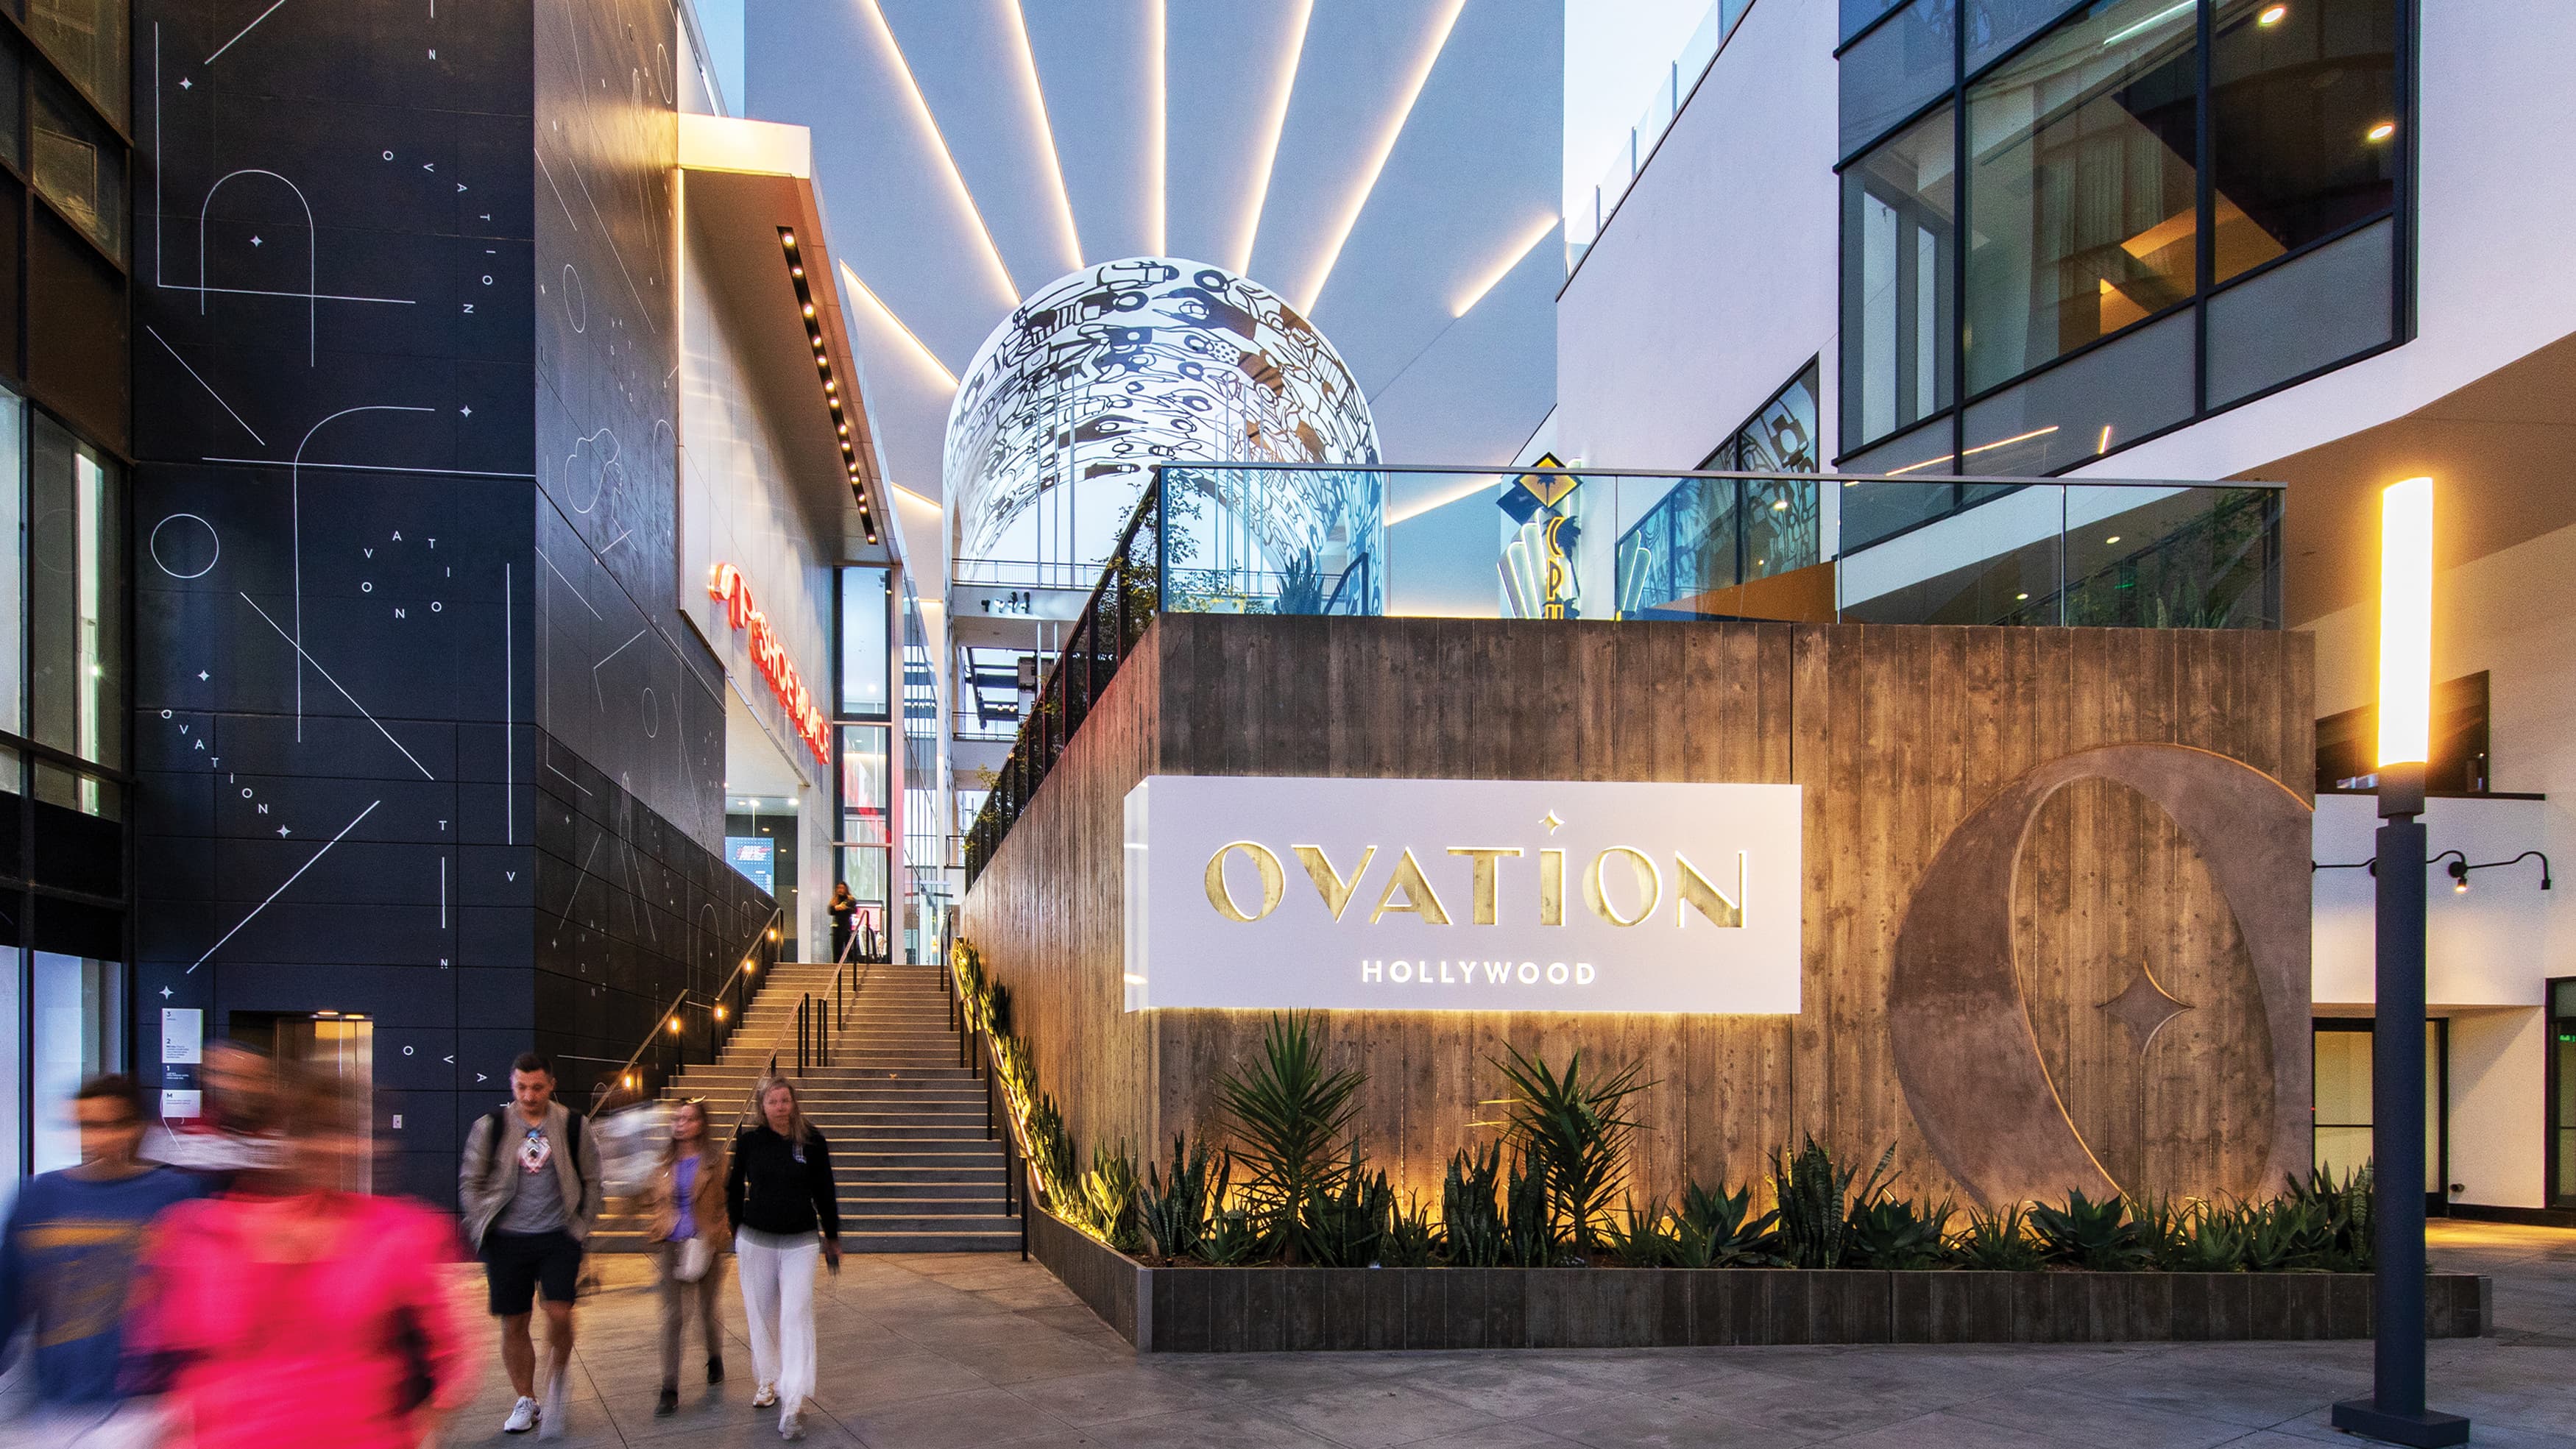 White illuminated Ovation logo sign on board form concrete wall with arch in background with illuminated rays extending on arch face.